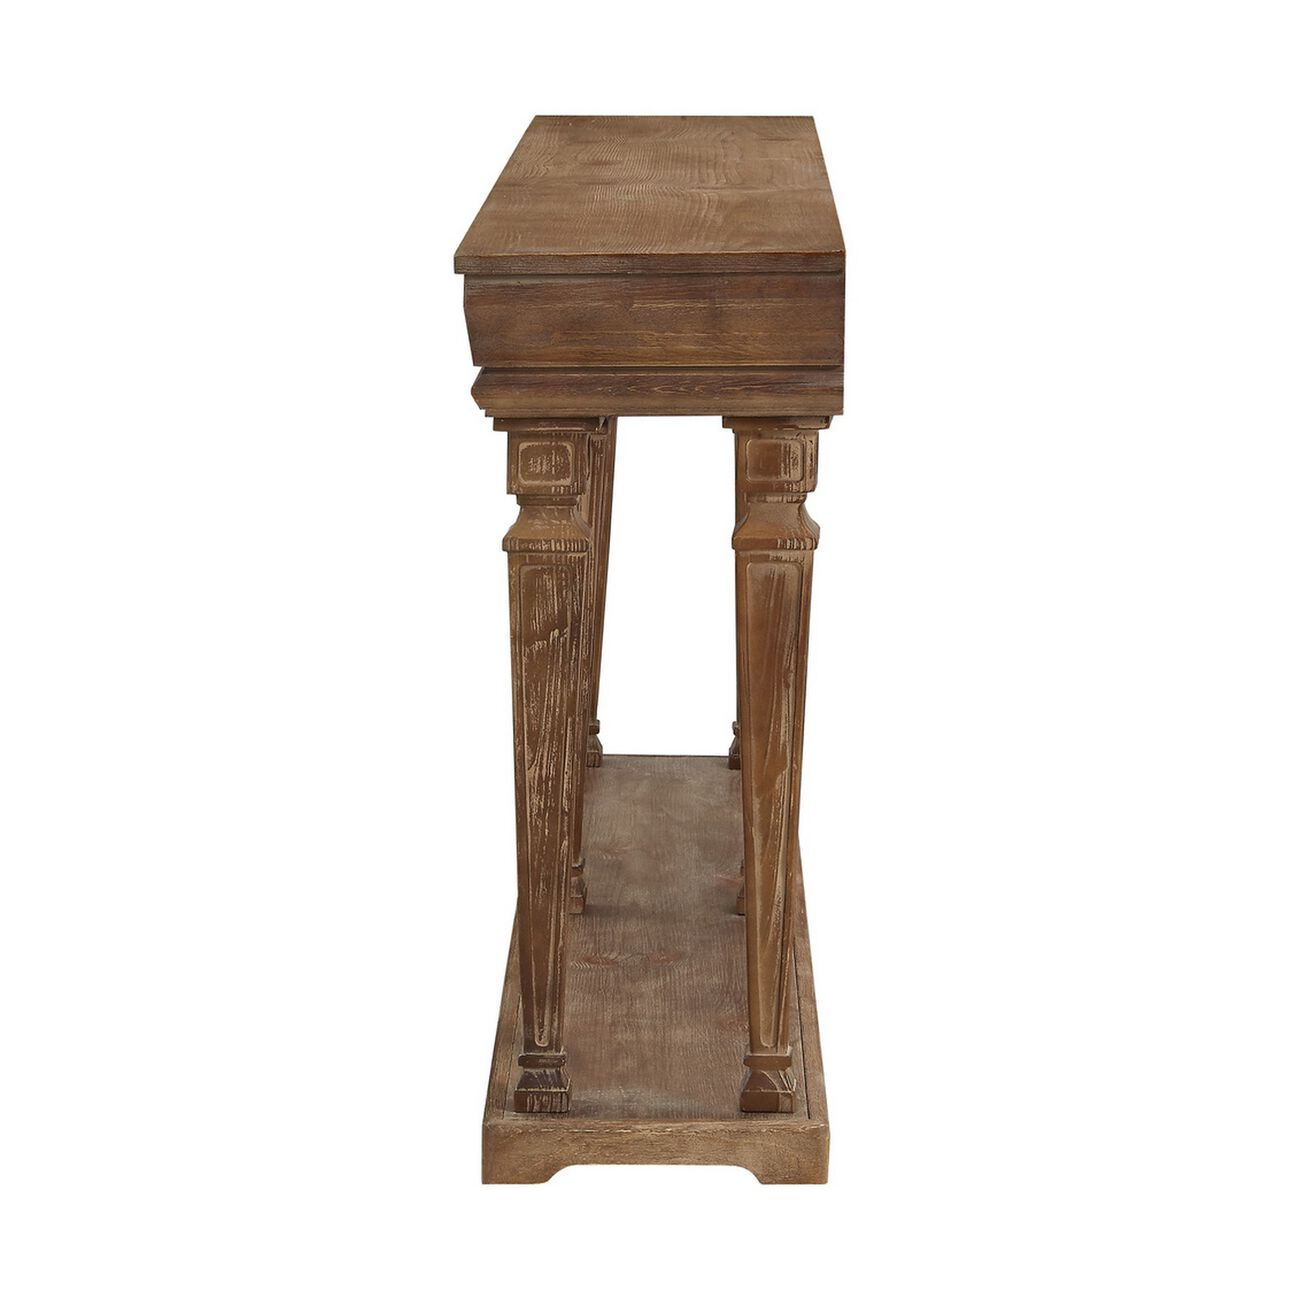 Traditional Style Wooden Console with One Open Bottom Shelf, Brown